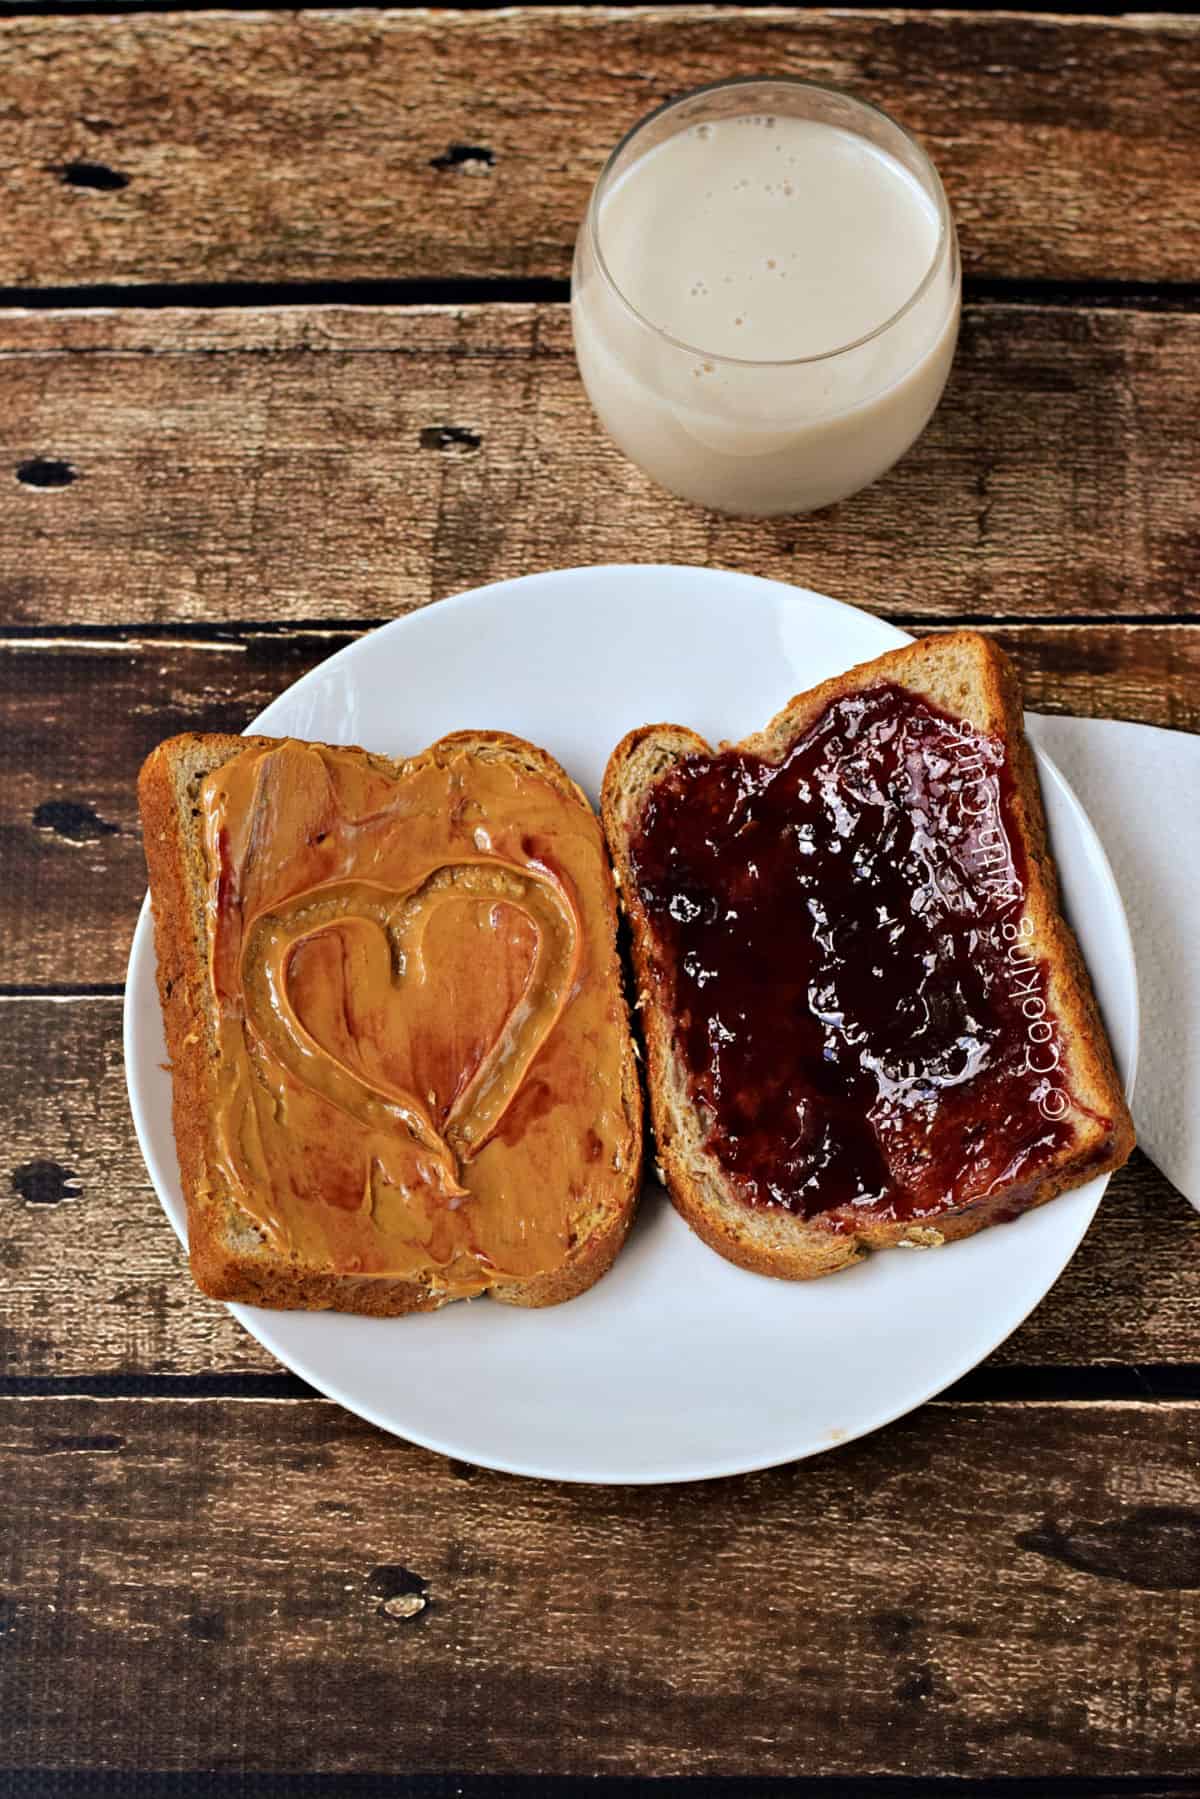 Peanut butter on a slice of bread with a heart in the center and jelly on a second piece of bread sitting on a plate. 